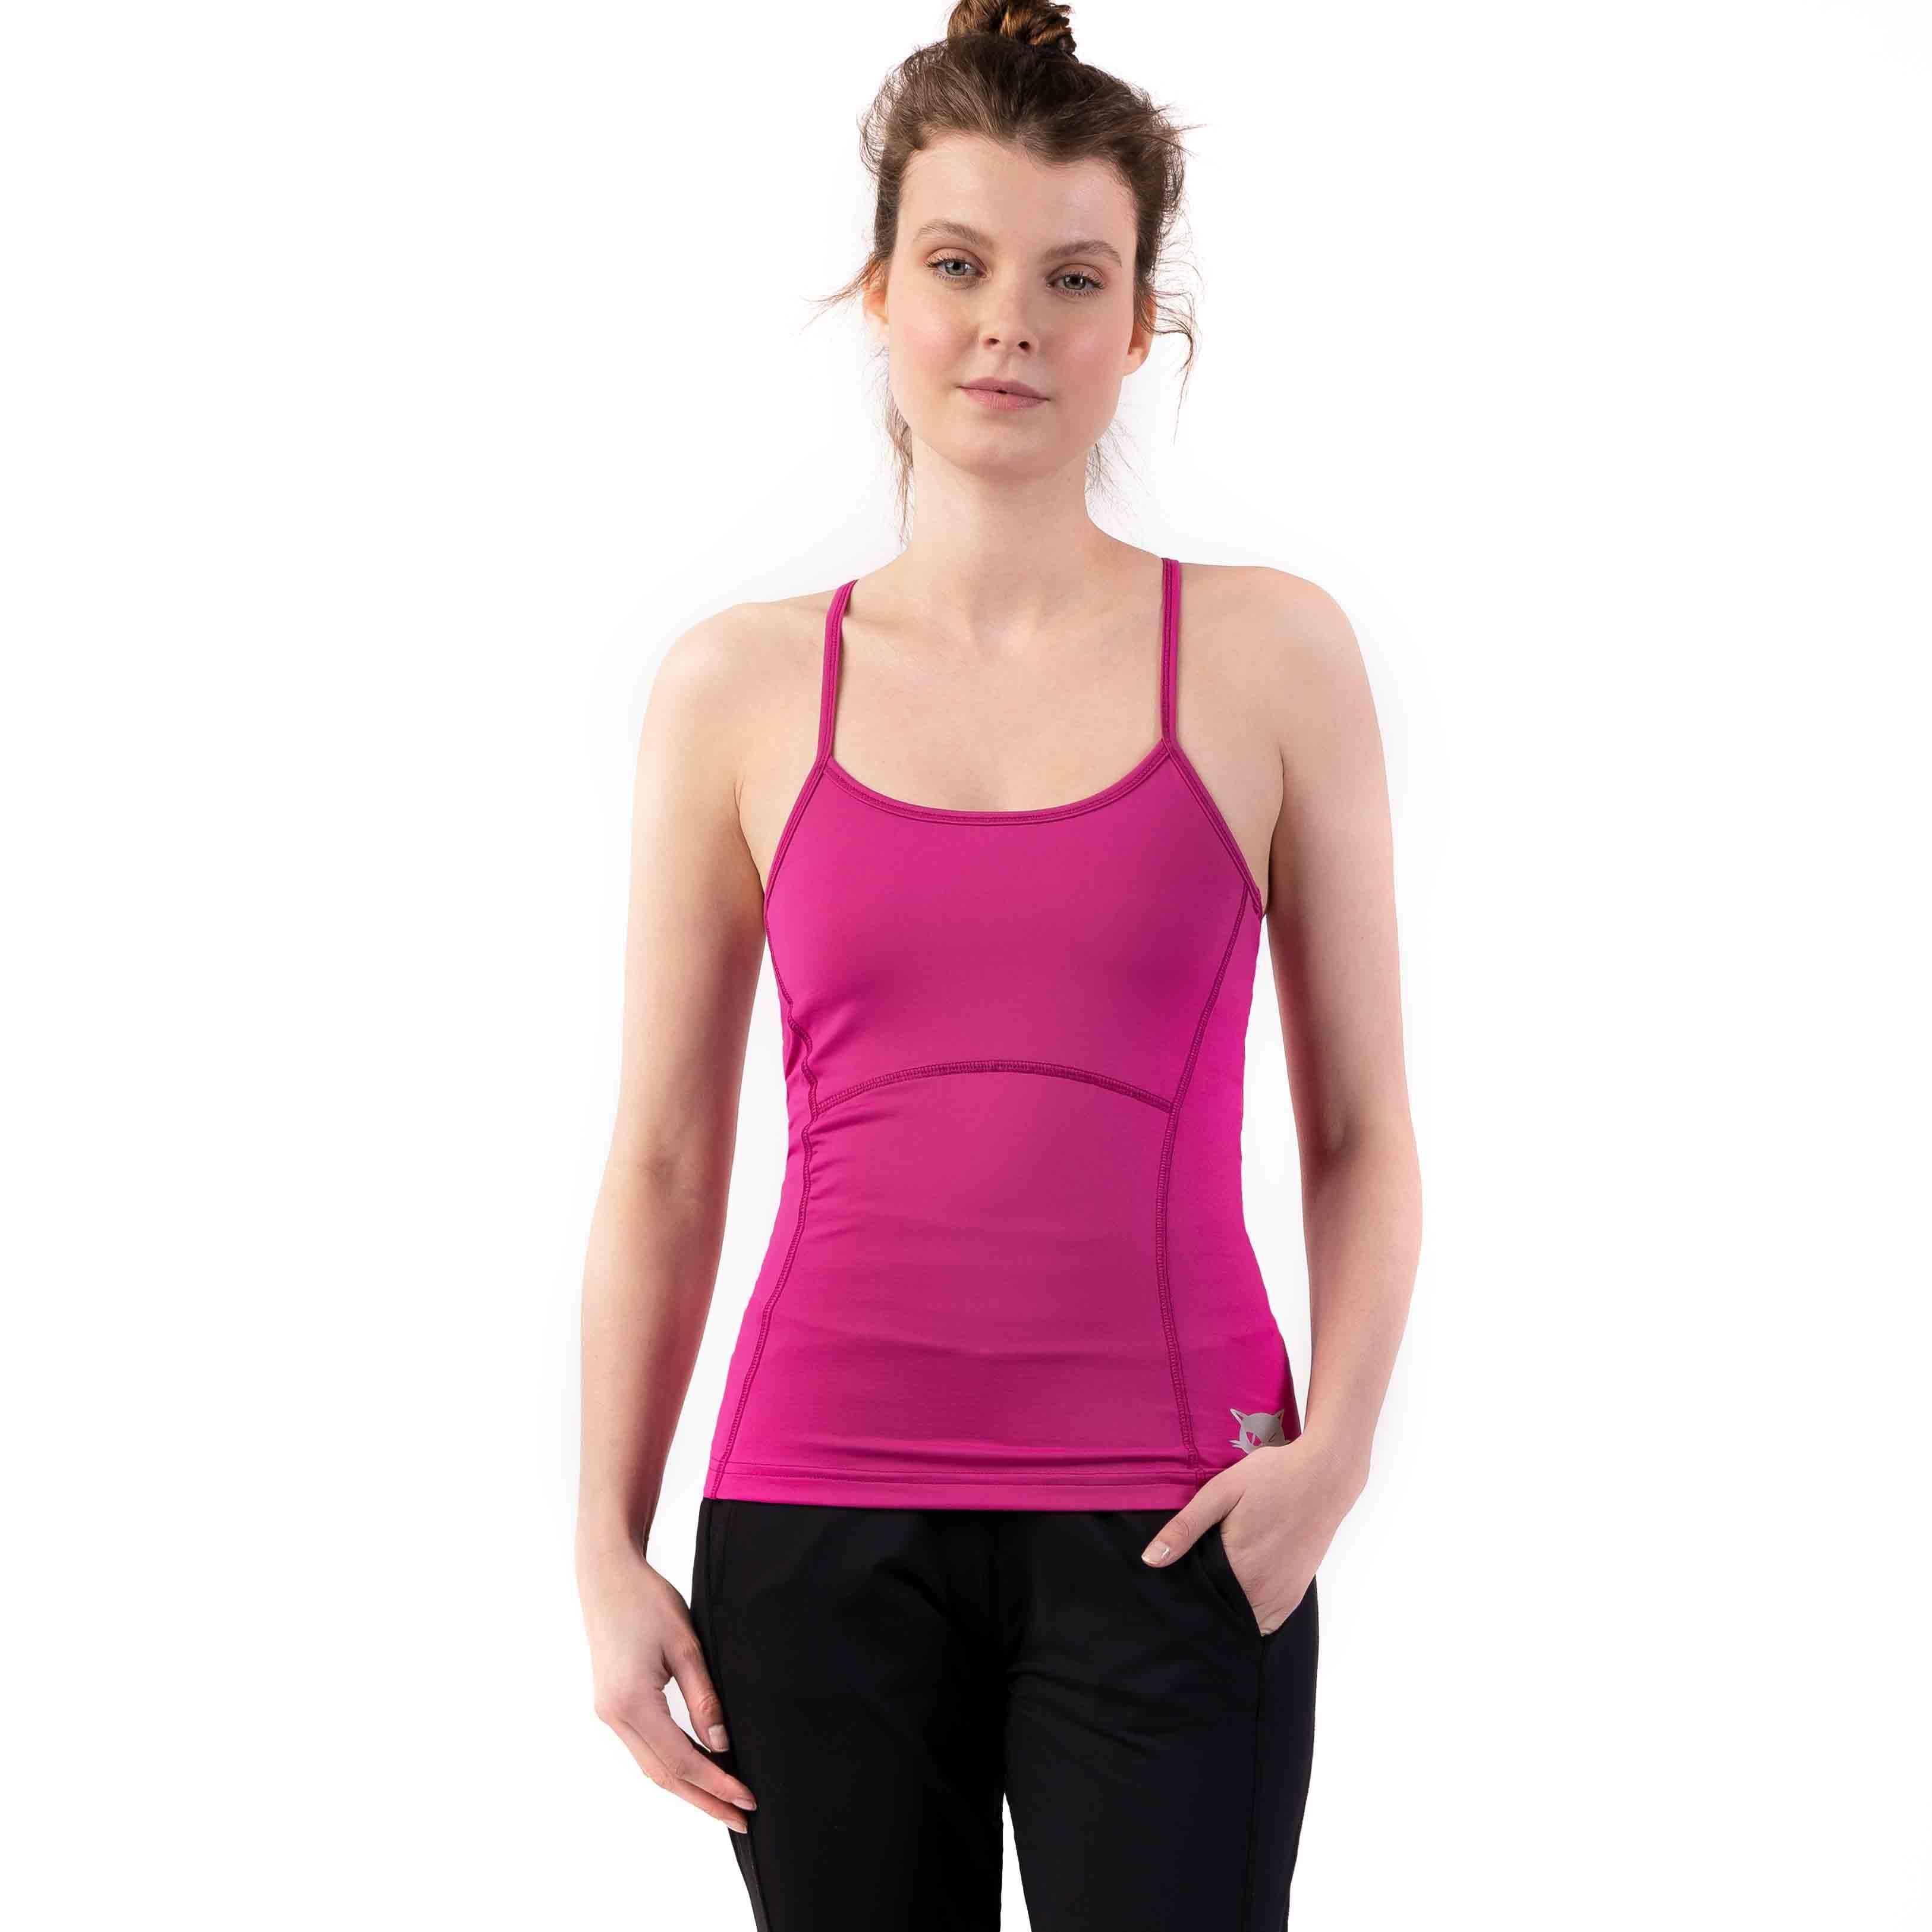 Yoga-Top "Prisca", fuchsia - Superactive Top aus recycletem Funktionsmaterial - Kamah Yoga and Style